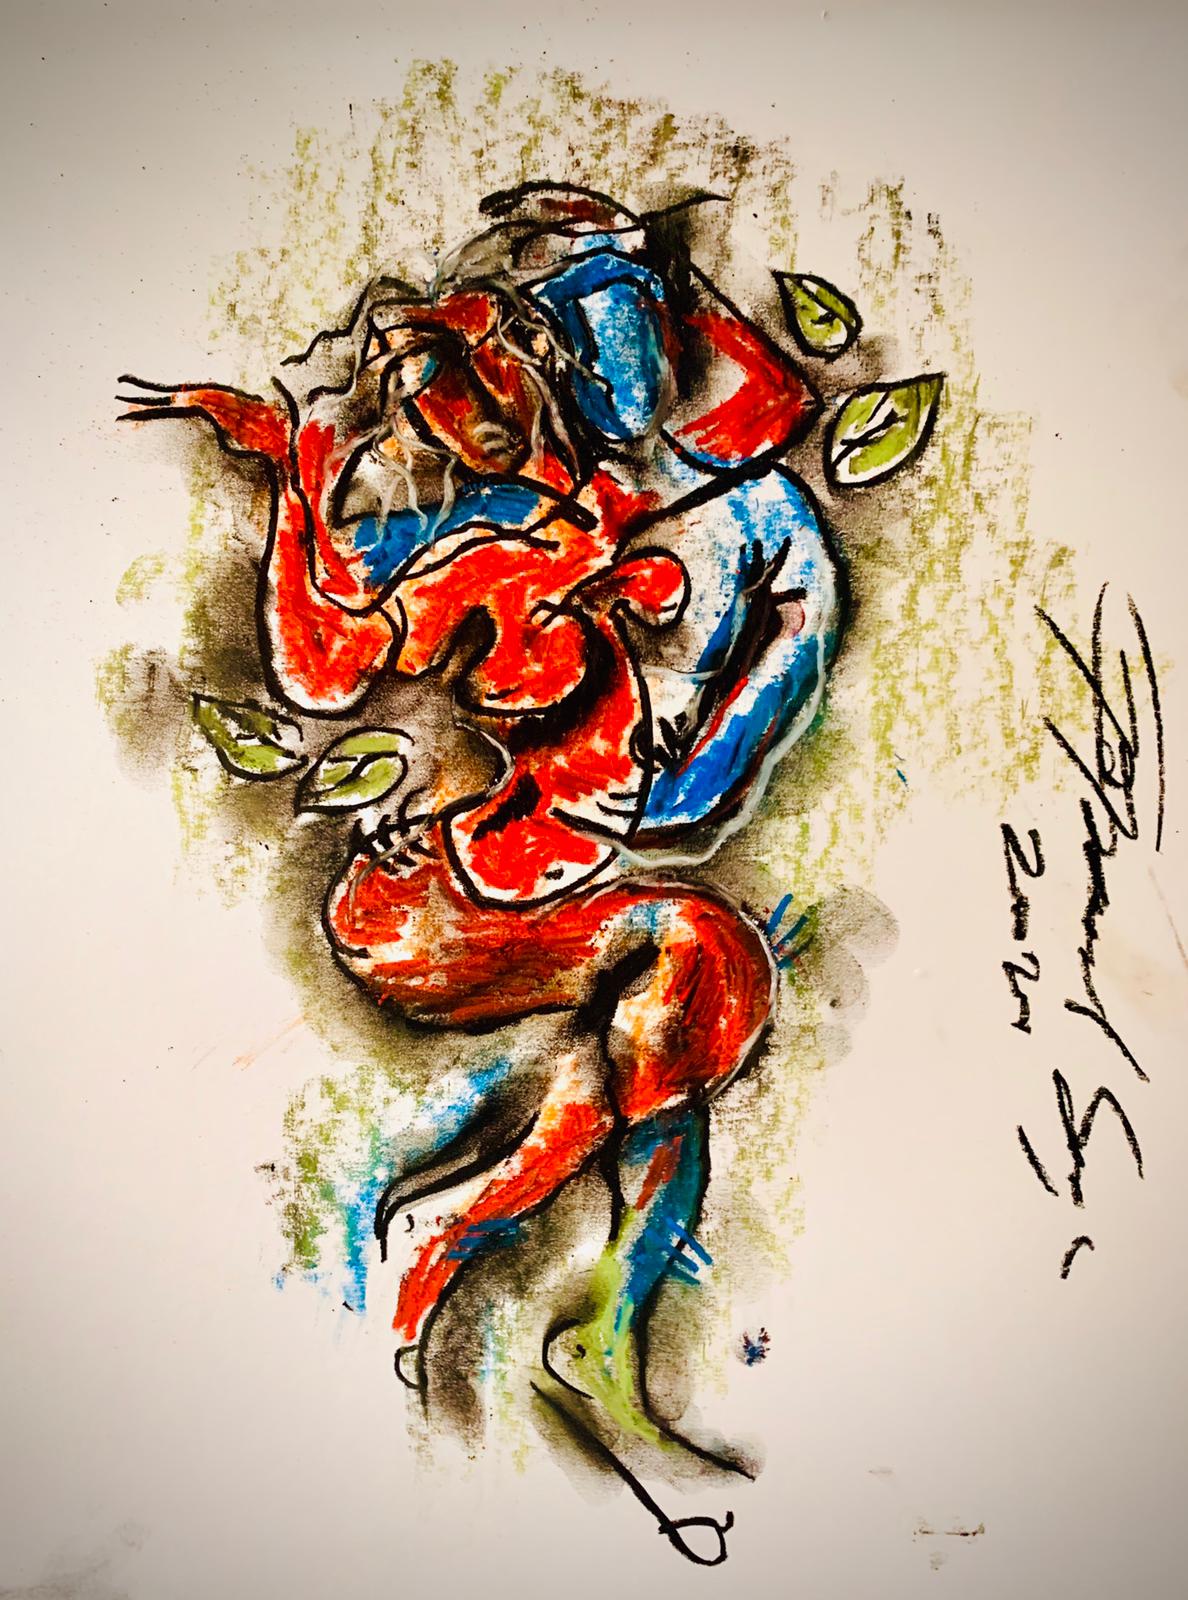 Buy Amor Painting the original Matted Charcoal and Pastel on Paper artwork by Indian-American artist Gopaal Seyn | RedBlueArts.com